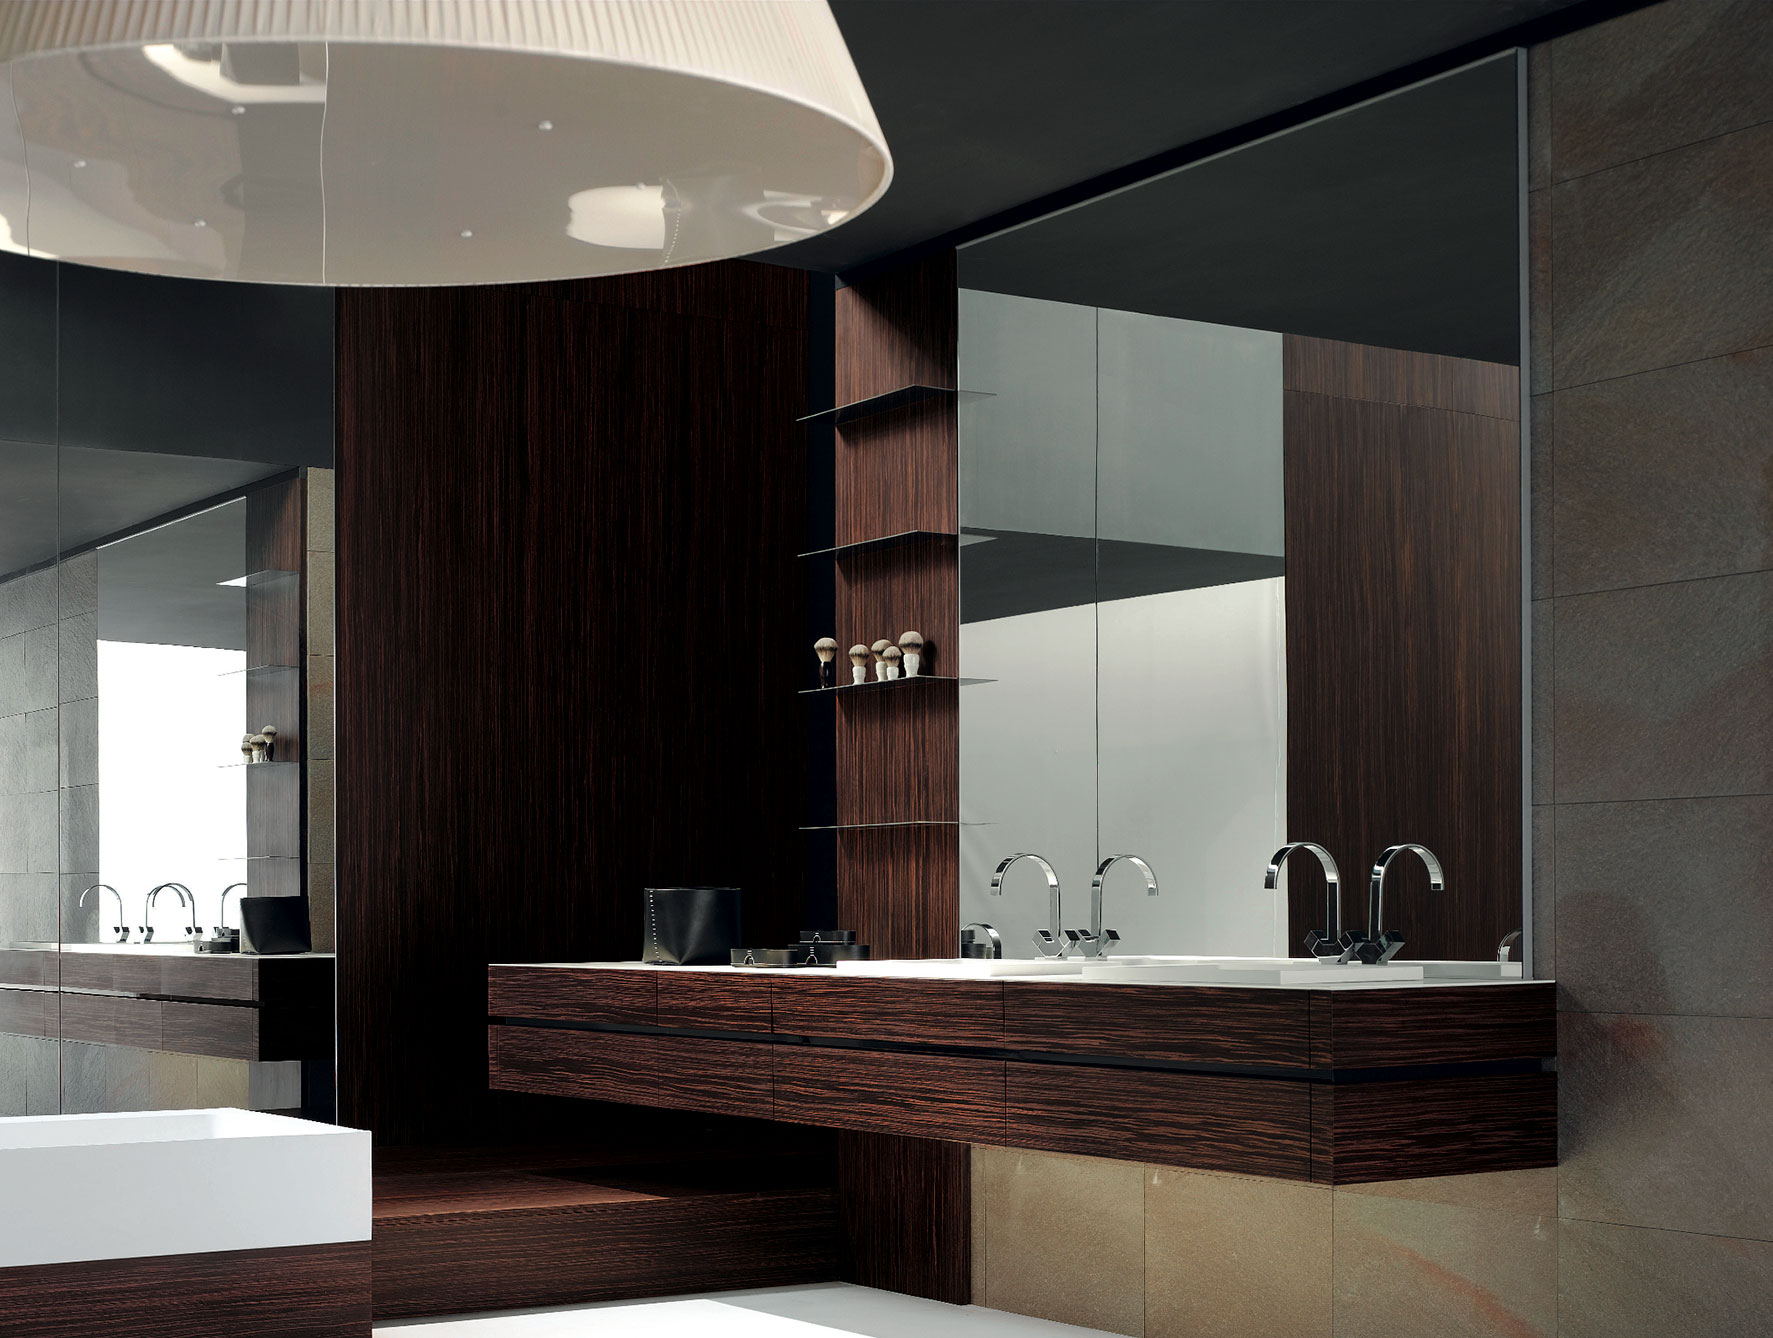 Bathroom Vanities Material Modern Bathroom Vanities Using Wooden Material And Large Wall Mirror Design Completed With Stylish Faucet Design Ideas Bathroom Modern Bathroom Vanities As Amusing Interior For Futuristic Home